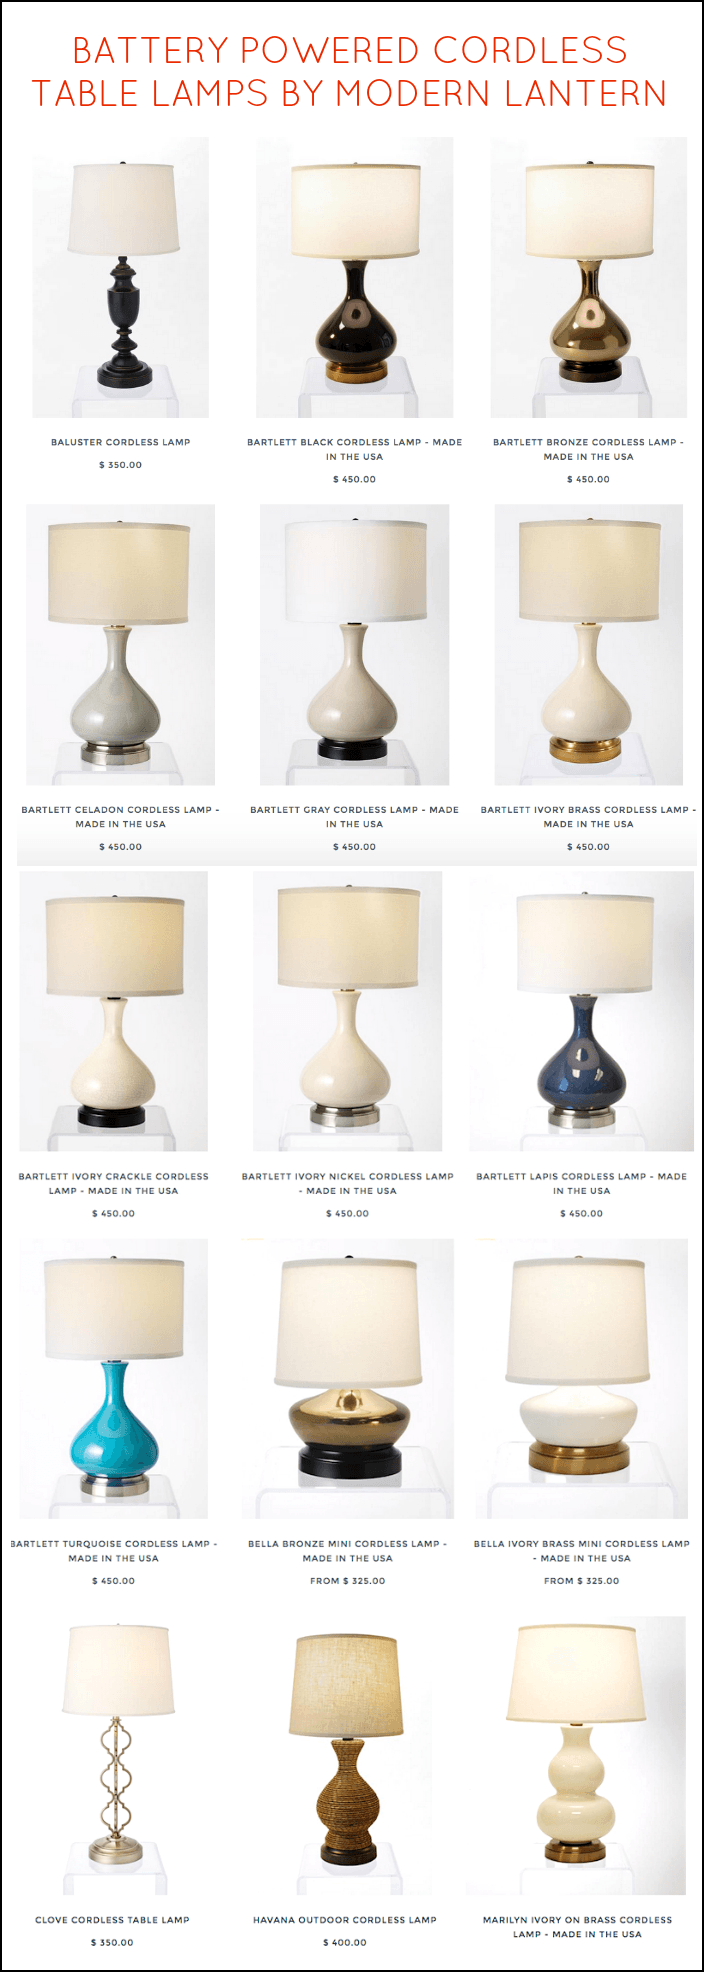 Make Your Table Lamp Cords Disappear, Small Cordless Table Lamps